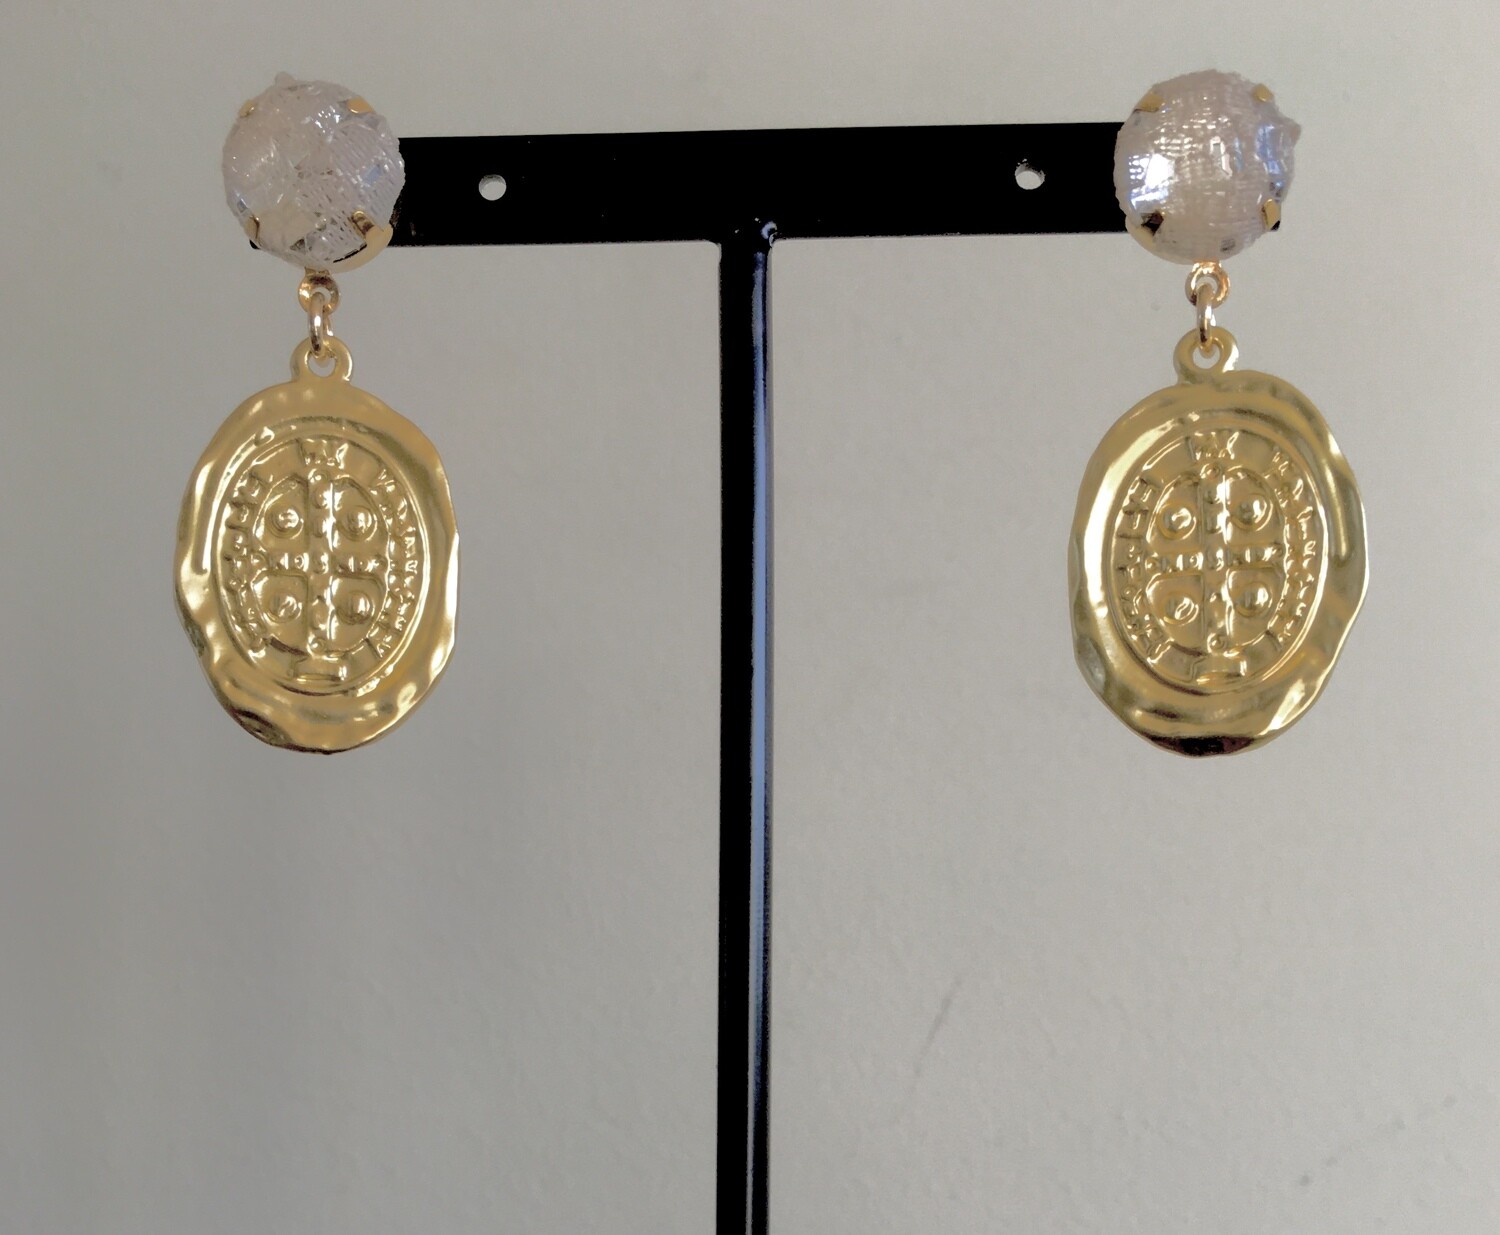 Antique coin earrings